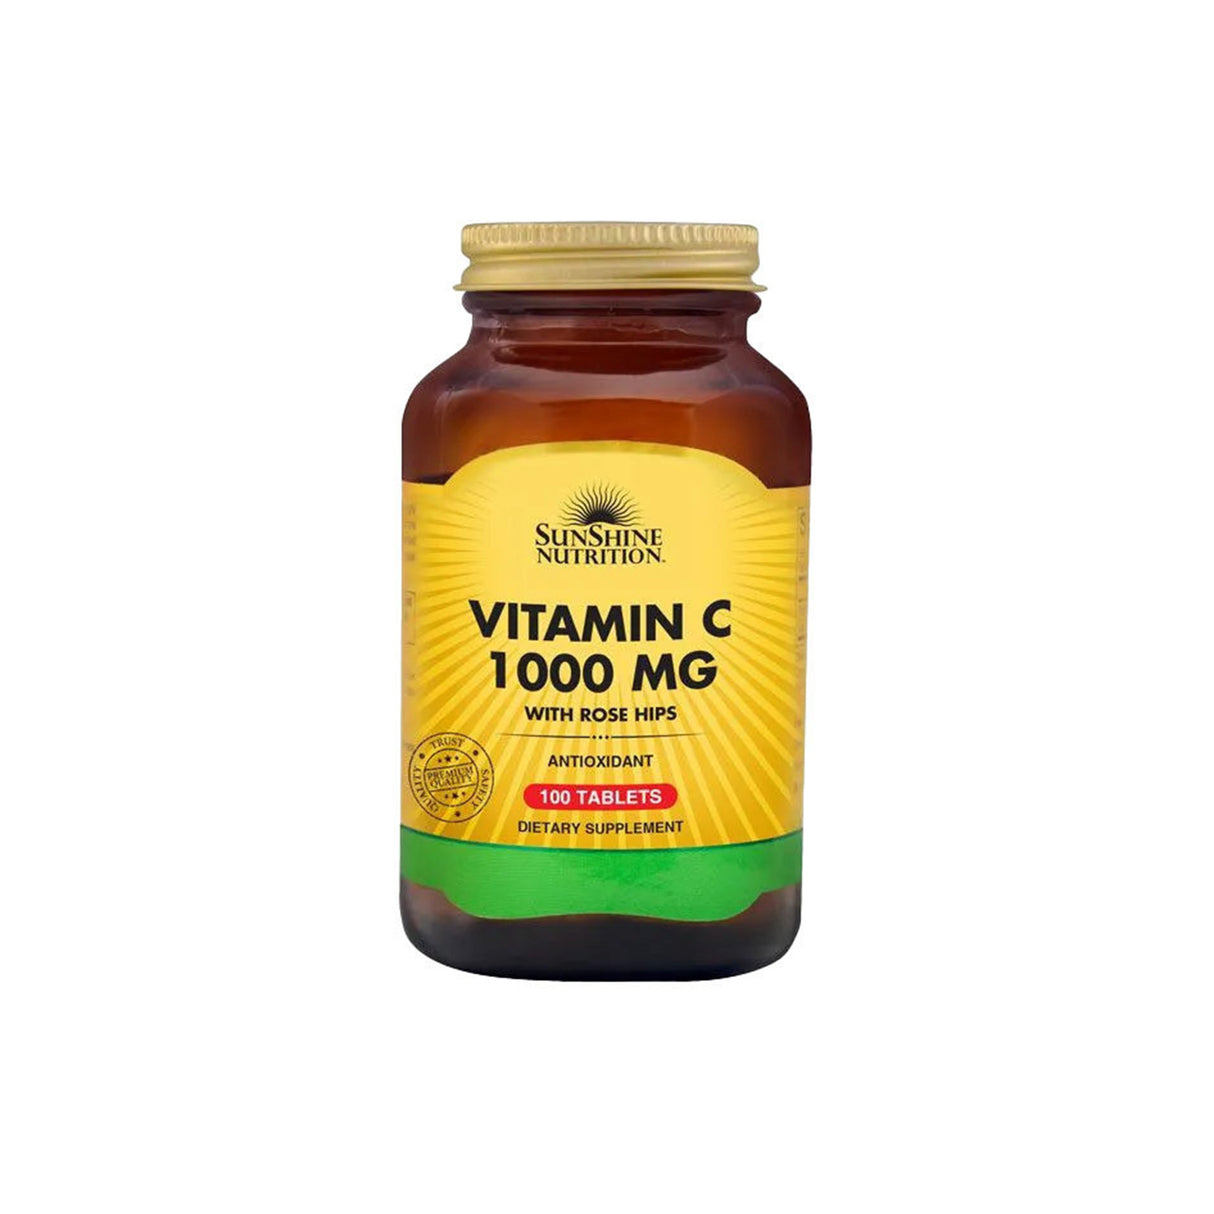 Sunshine Nutrition Vitamin C 1000mg With Rosehips 100 Tabs